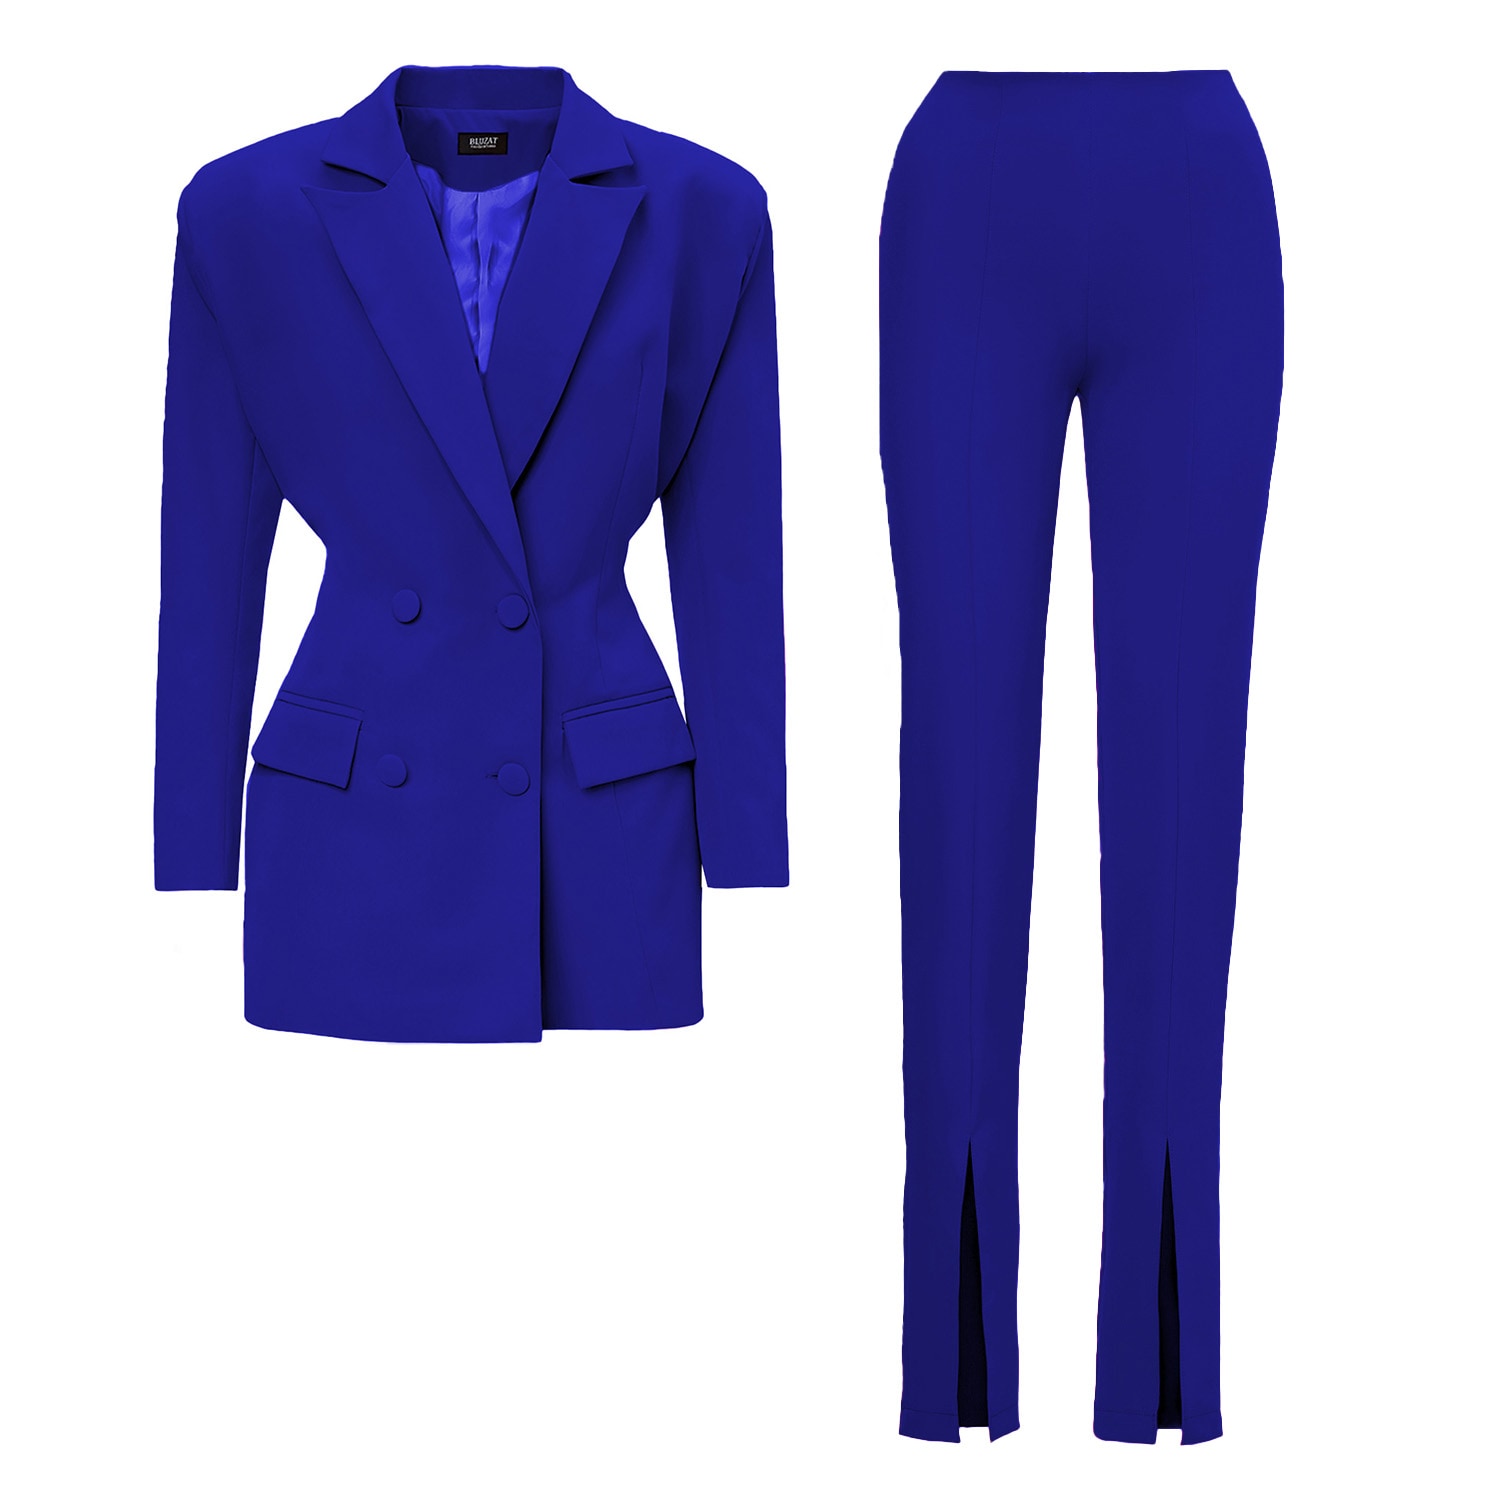 Women’s Electric Blue Suit With Tailored Hourglass Blazer And Slim Fit Trousers Small Bluzat